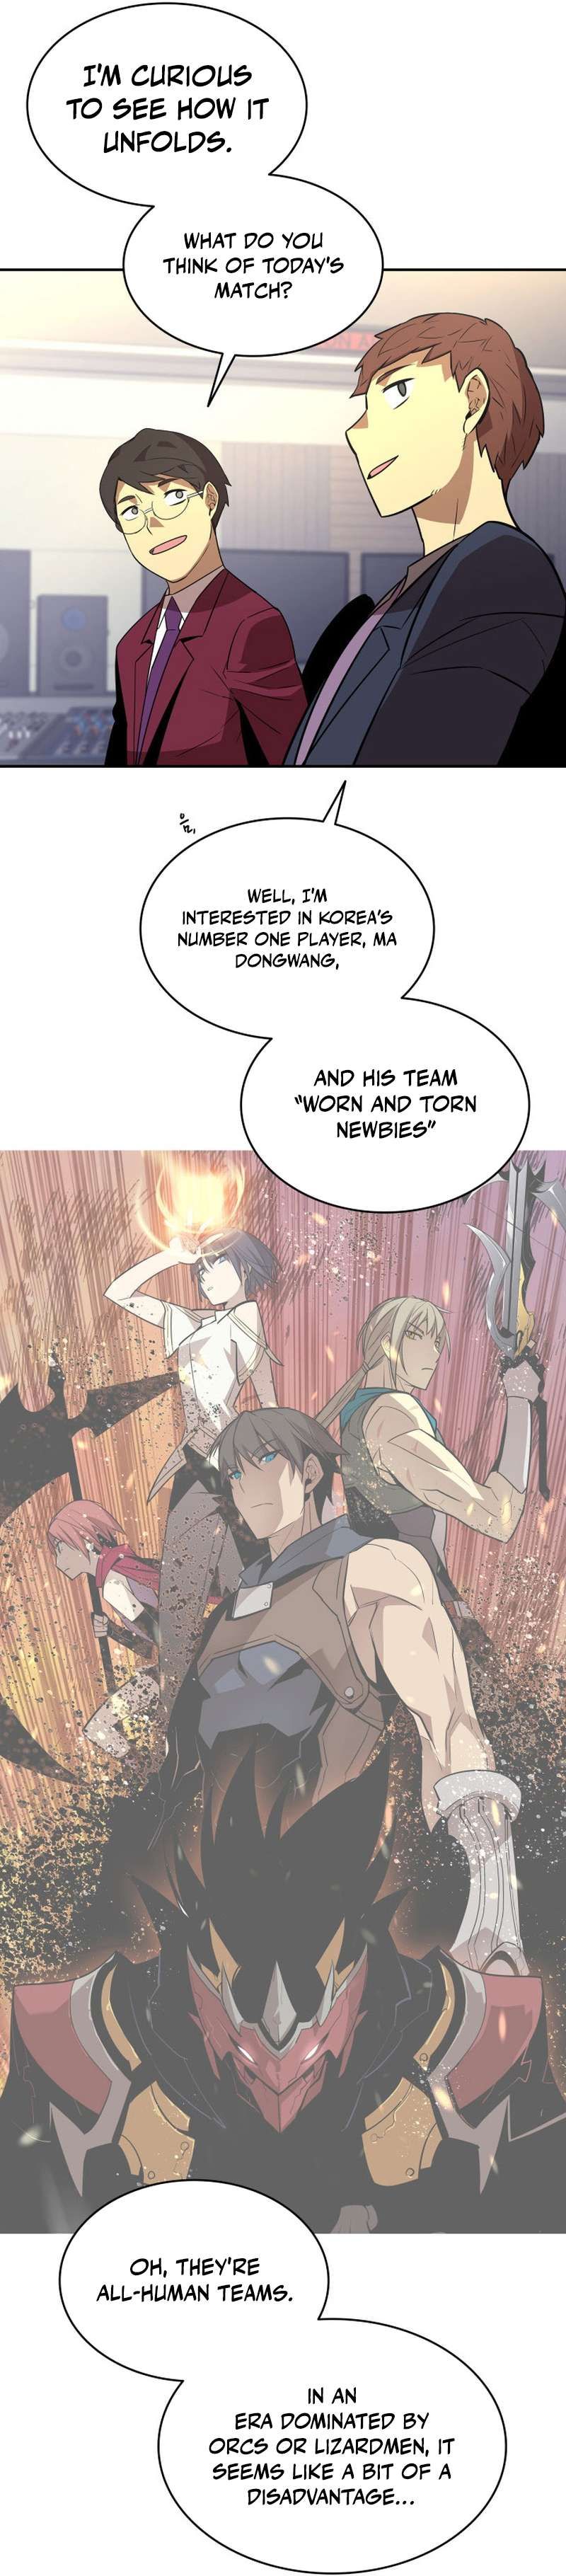 Worn and Torn Newbie Chapter 162 page 10